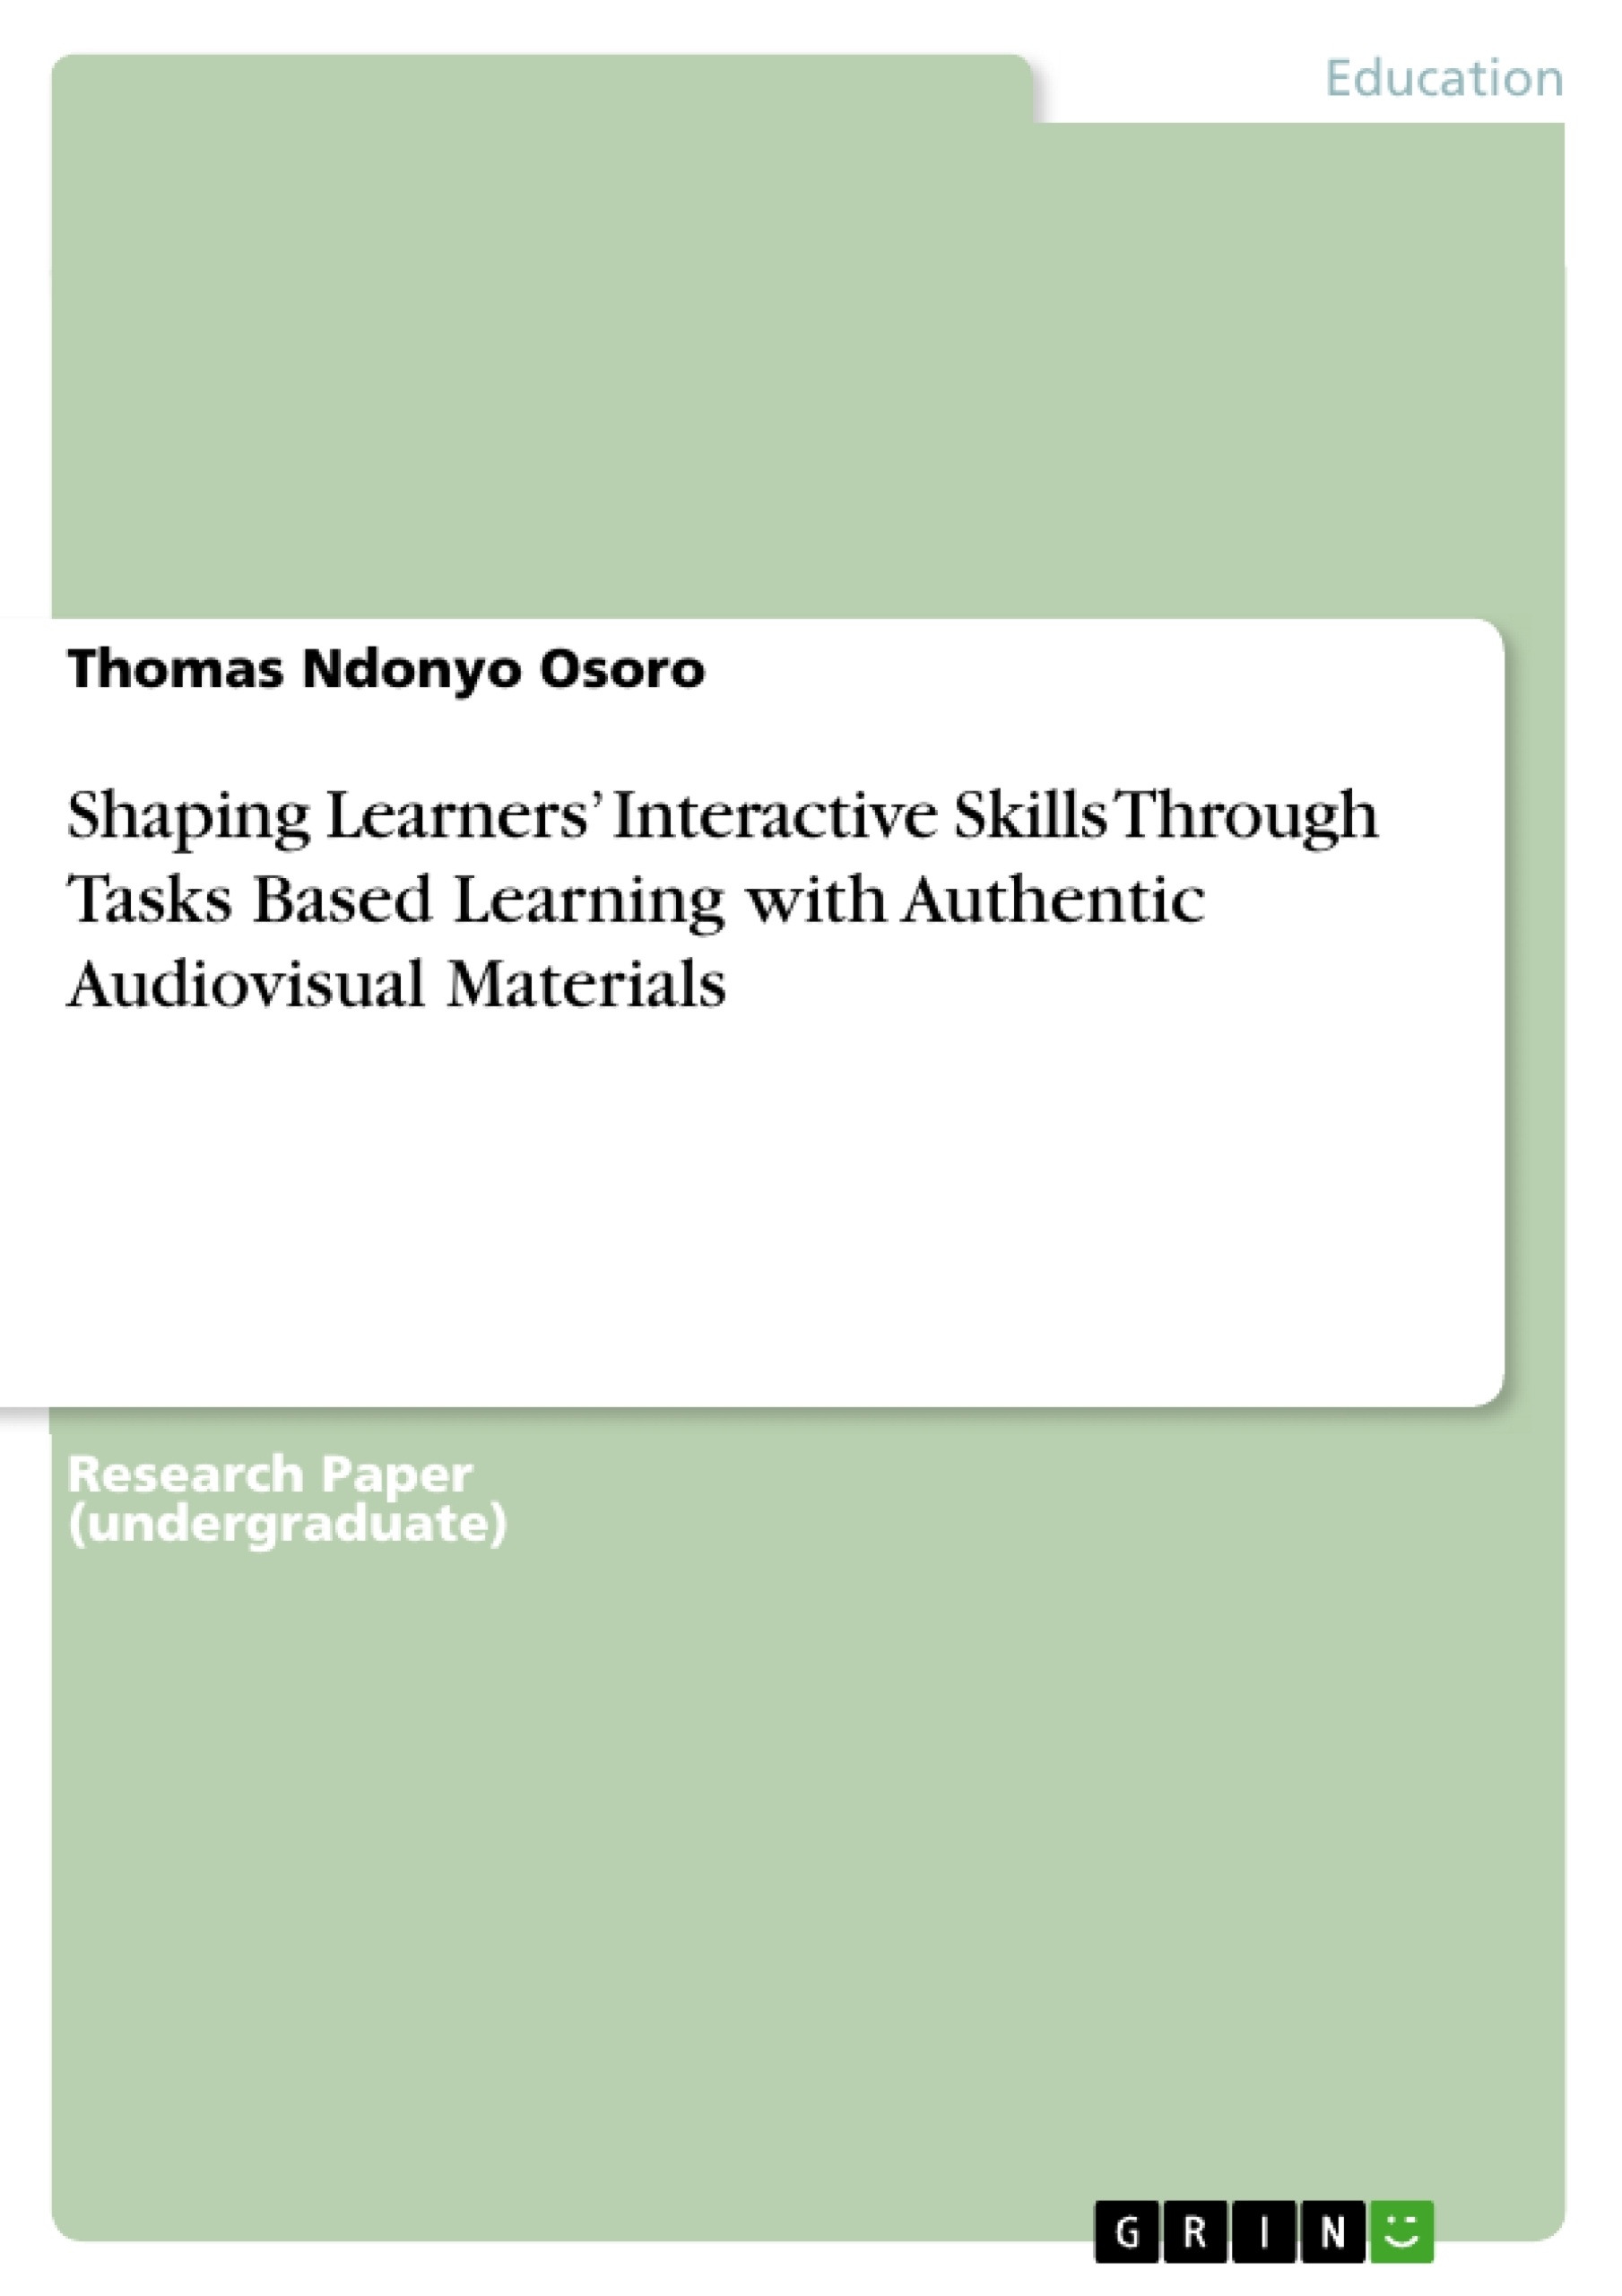 Title: Shaping Learners’ Interactive Skills Through Tasks Based Learning with Authentic Audiovisual Materials